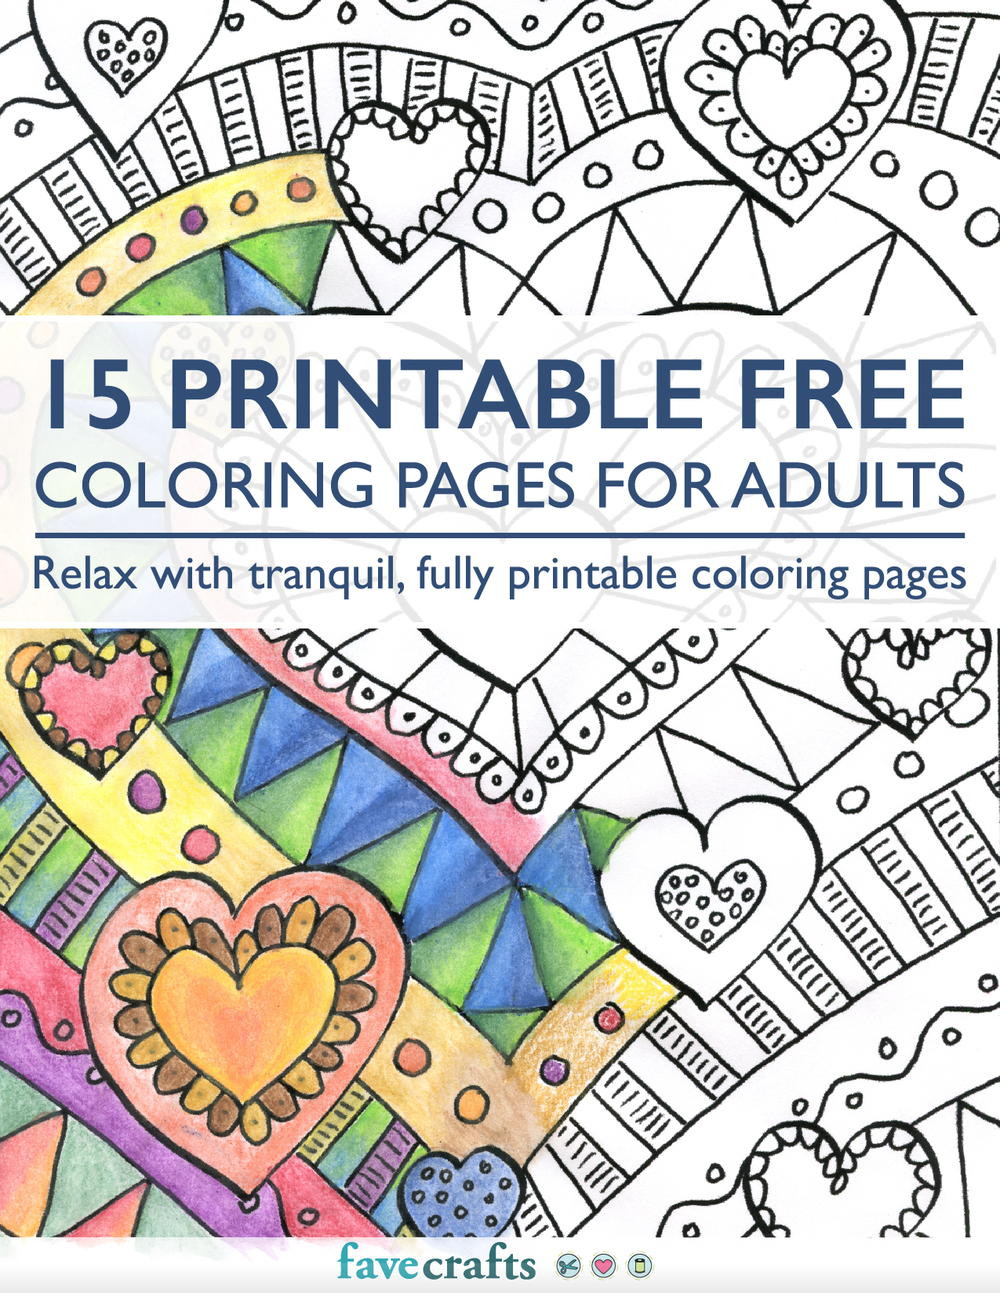 Large Print Coloring Pages For Adults
 15 Printable Free Coloring Pages for Adults [PDF